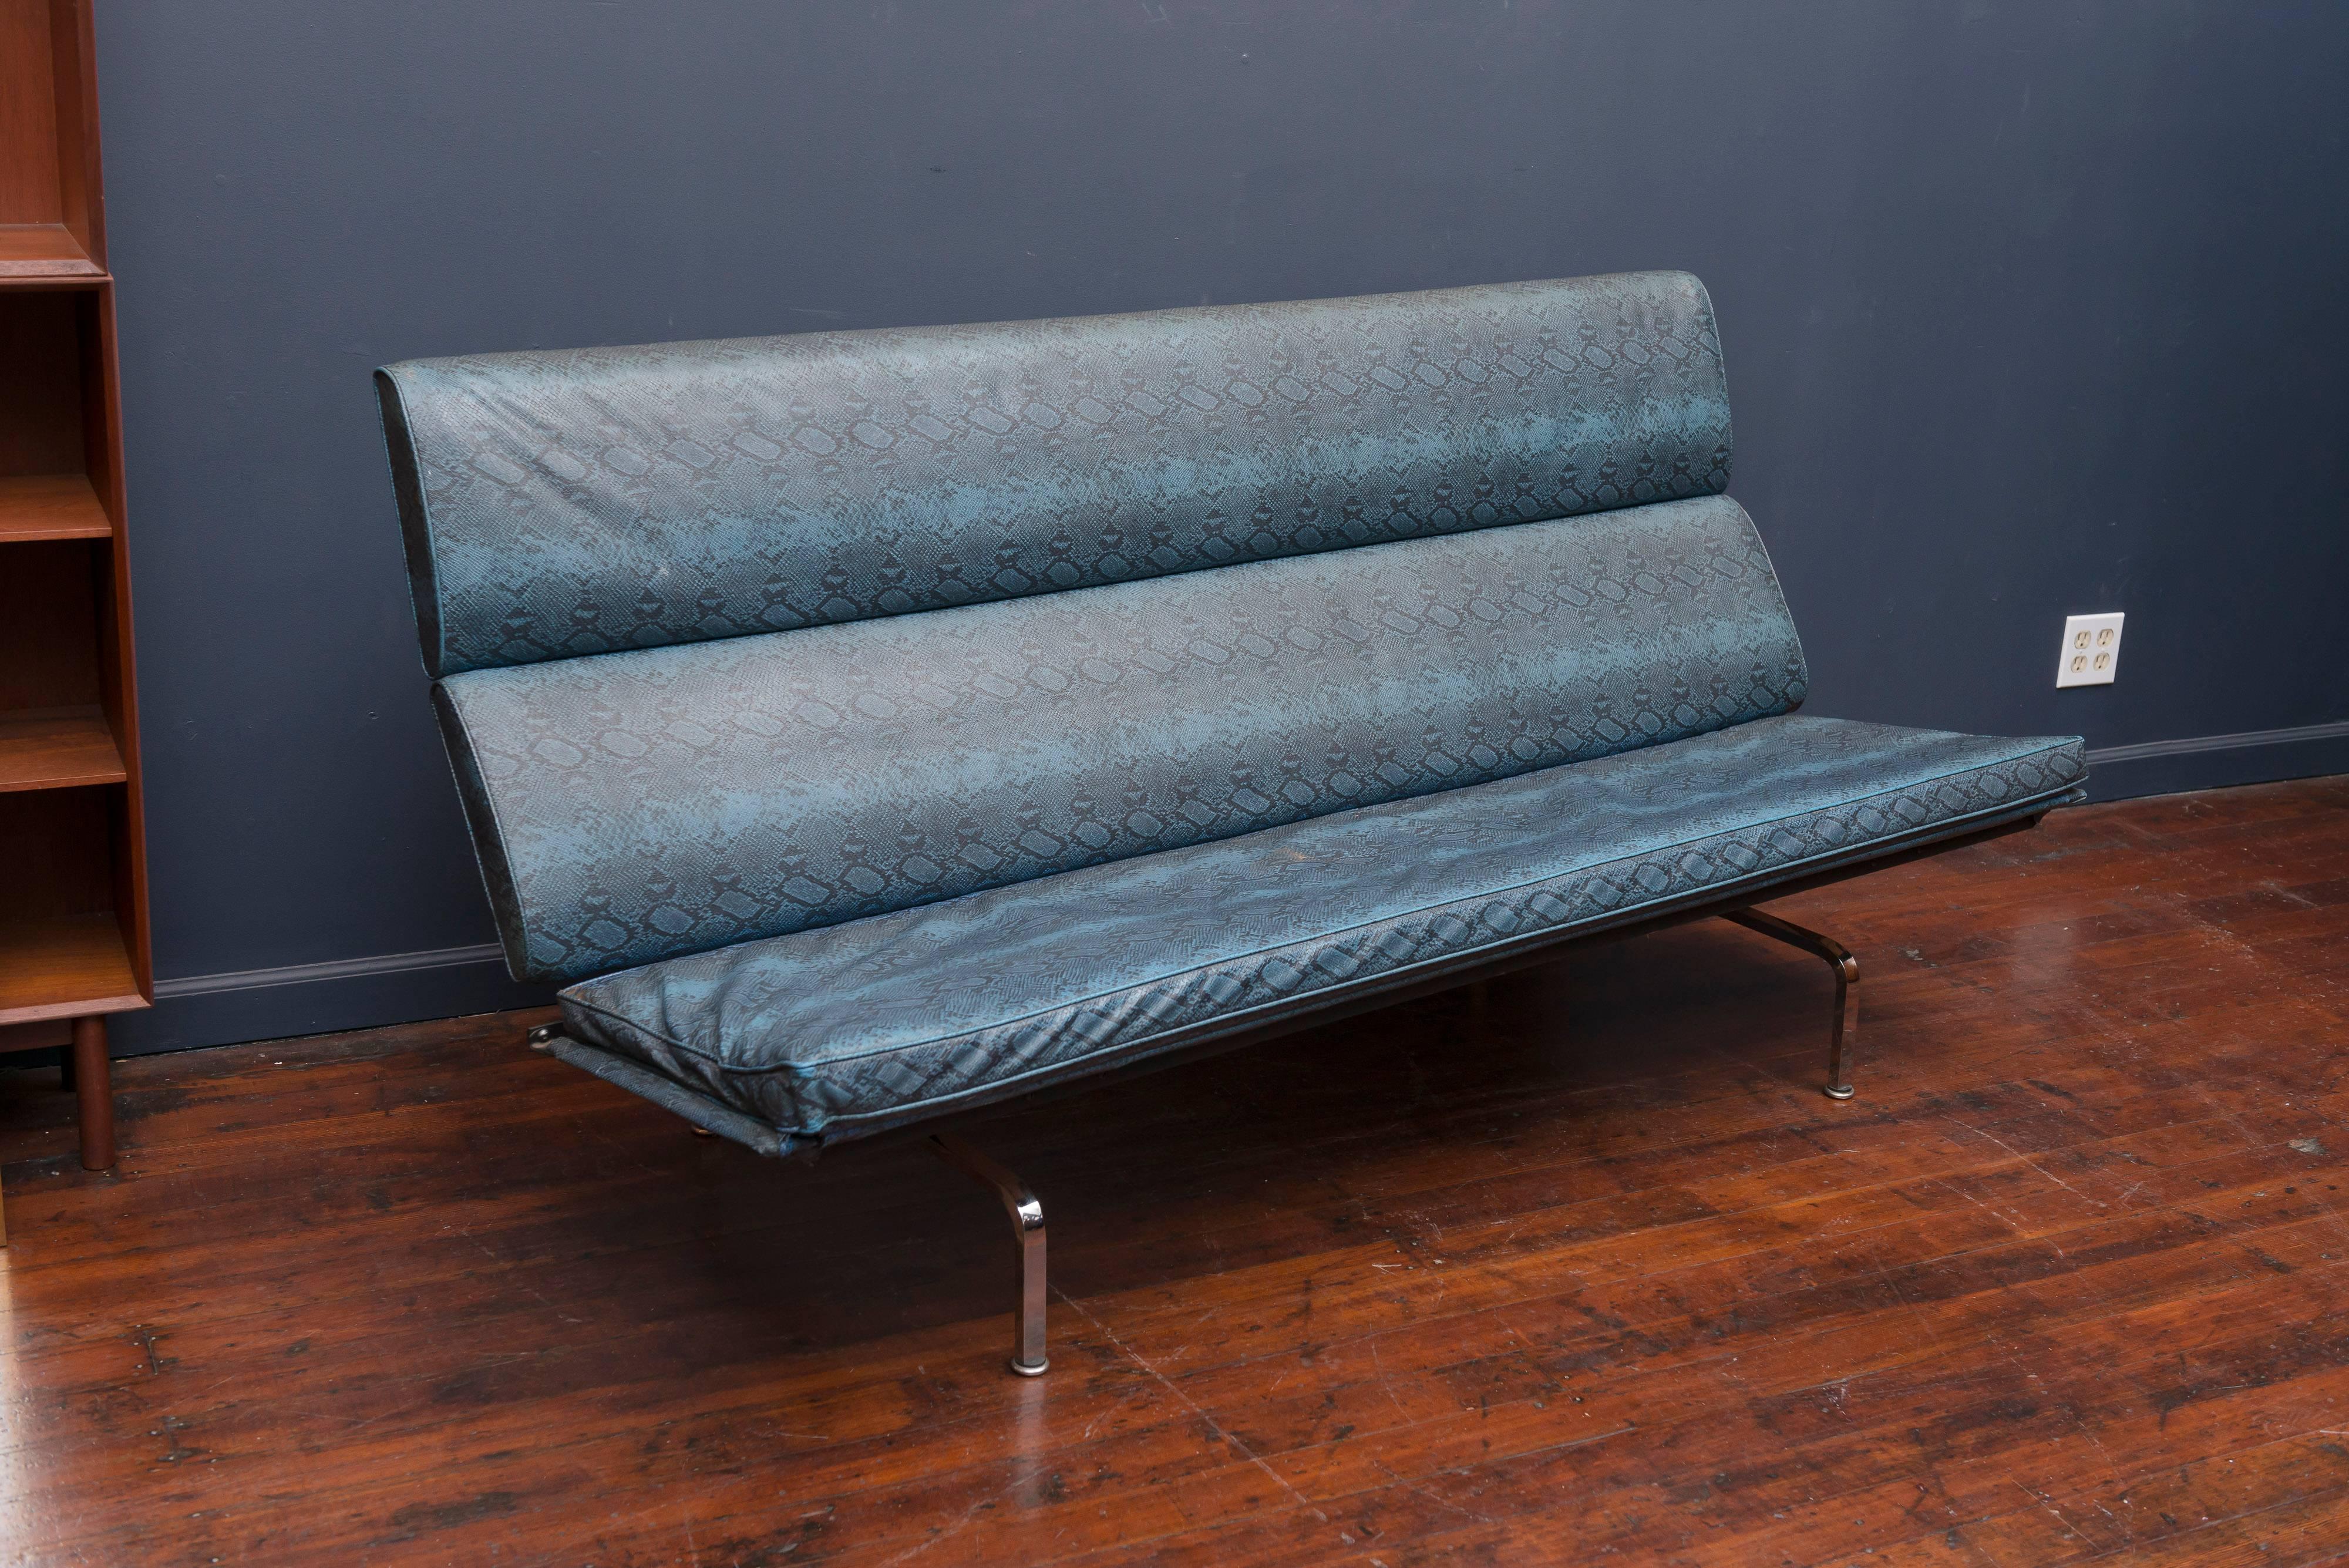 Early original Charles and Ray Eames design compact sofa for Herman Miller. Purchased by a local advertising agency furnished exclusively in iconic Herman Miller and Knoll pieces and featured in the Herman Miller book of Interiors (Morrisson Travel